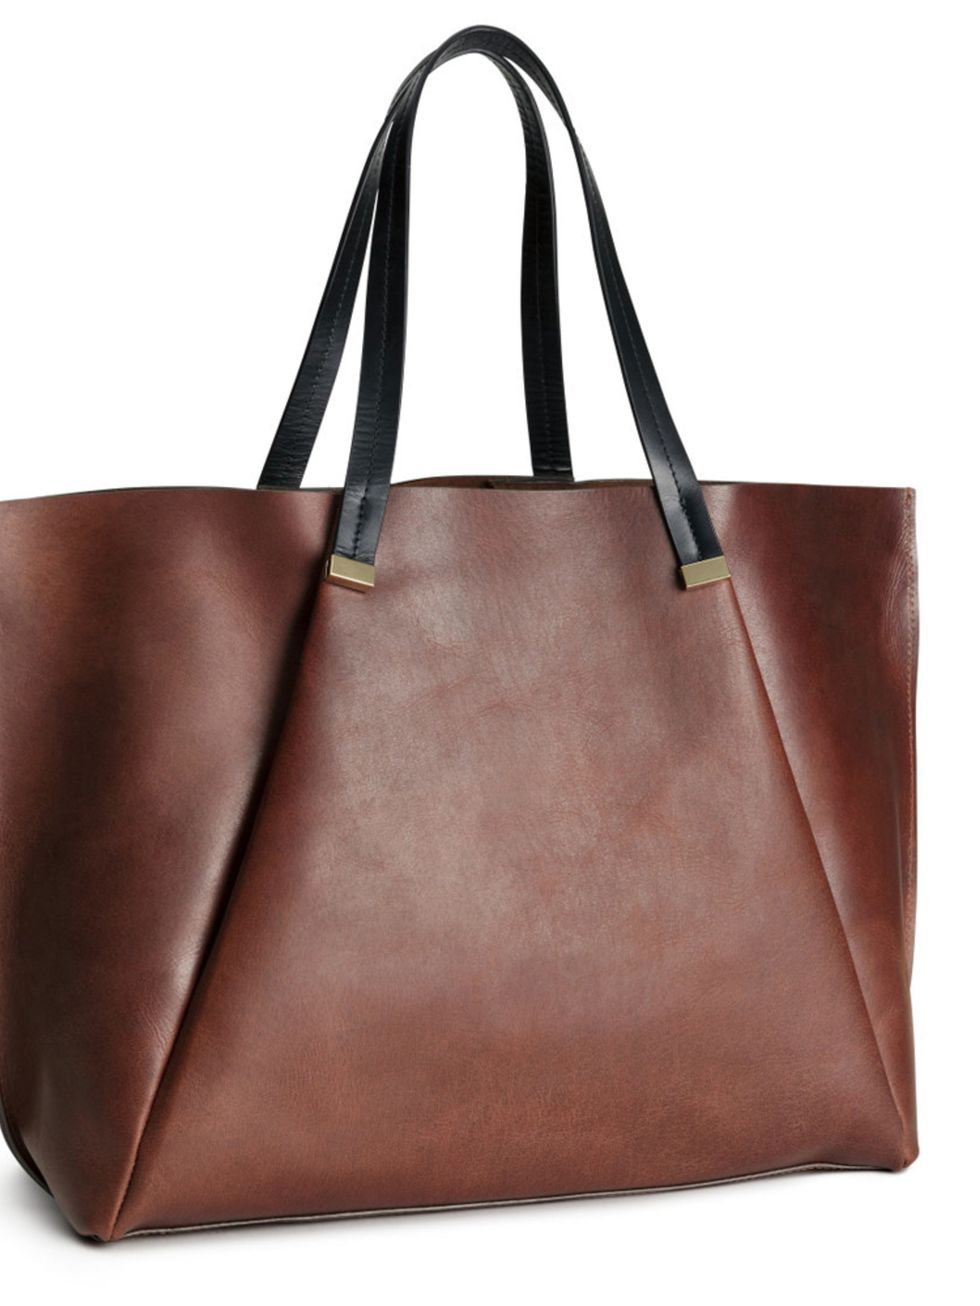 <p>Large tote, £69.99 by <a href="http://www.hm.com/gb/product/32172?article=32172-A">H&M</a>.</p>